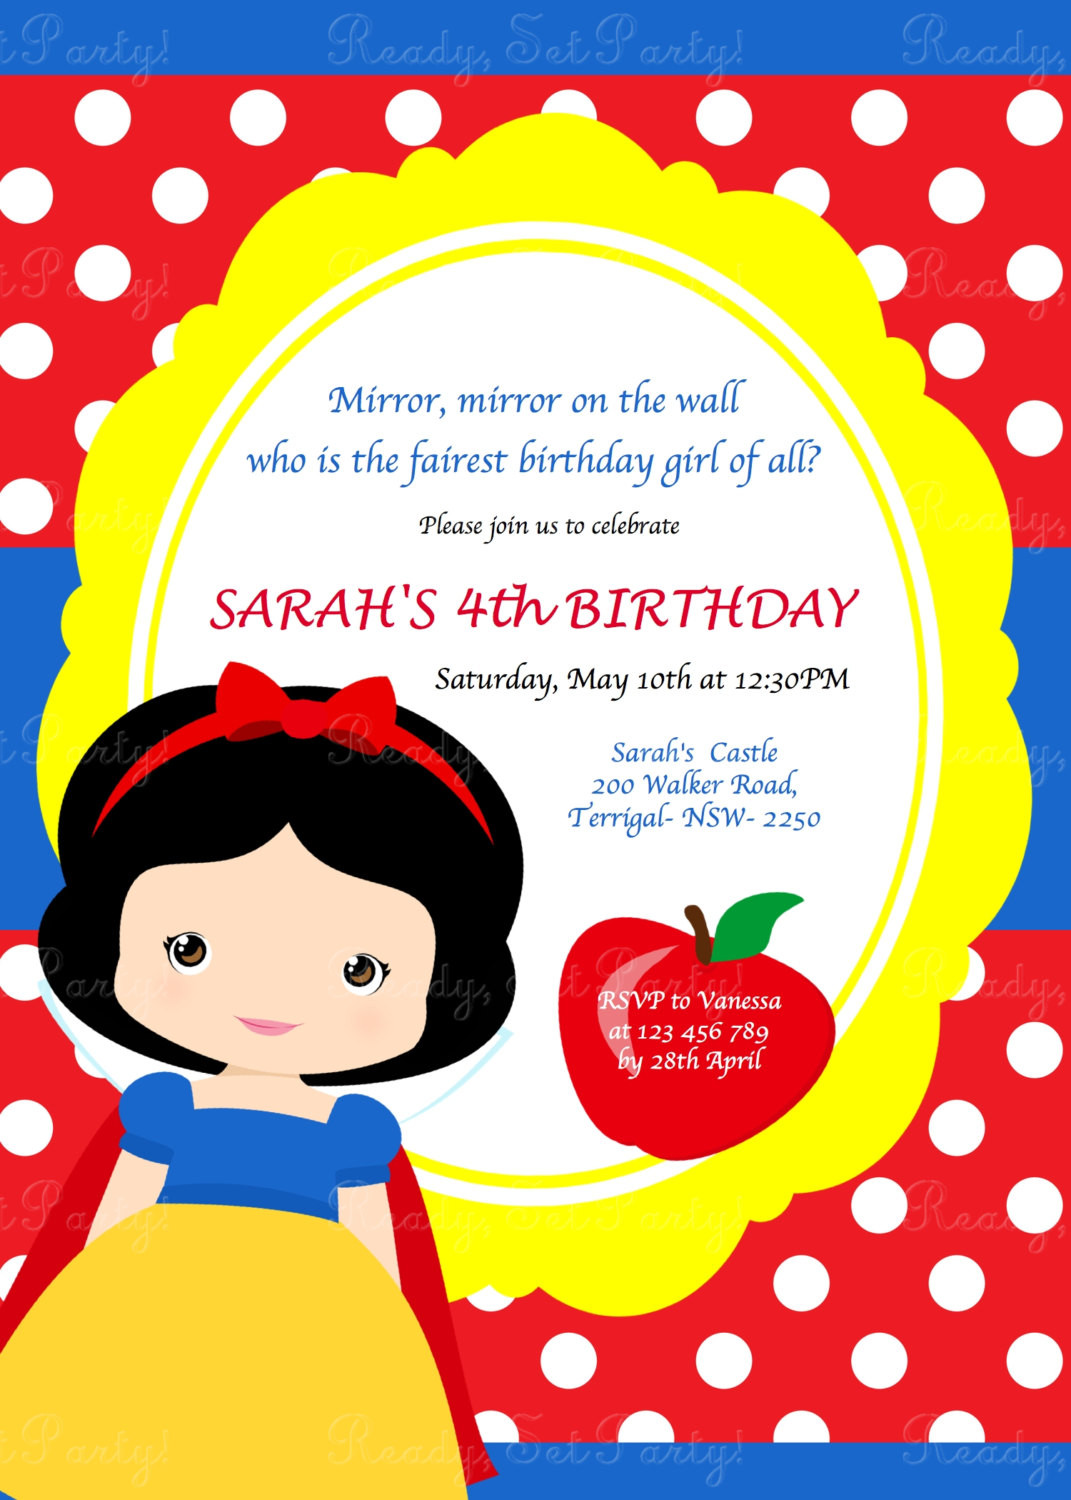 Snow White Birthday Invitations
 Snow White Birthday Party Invitation by Love this Moment